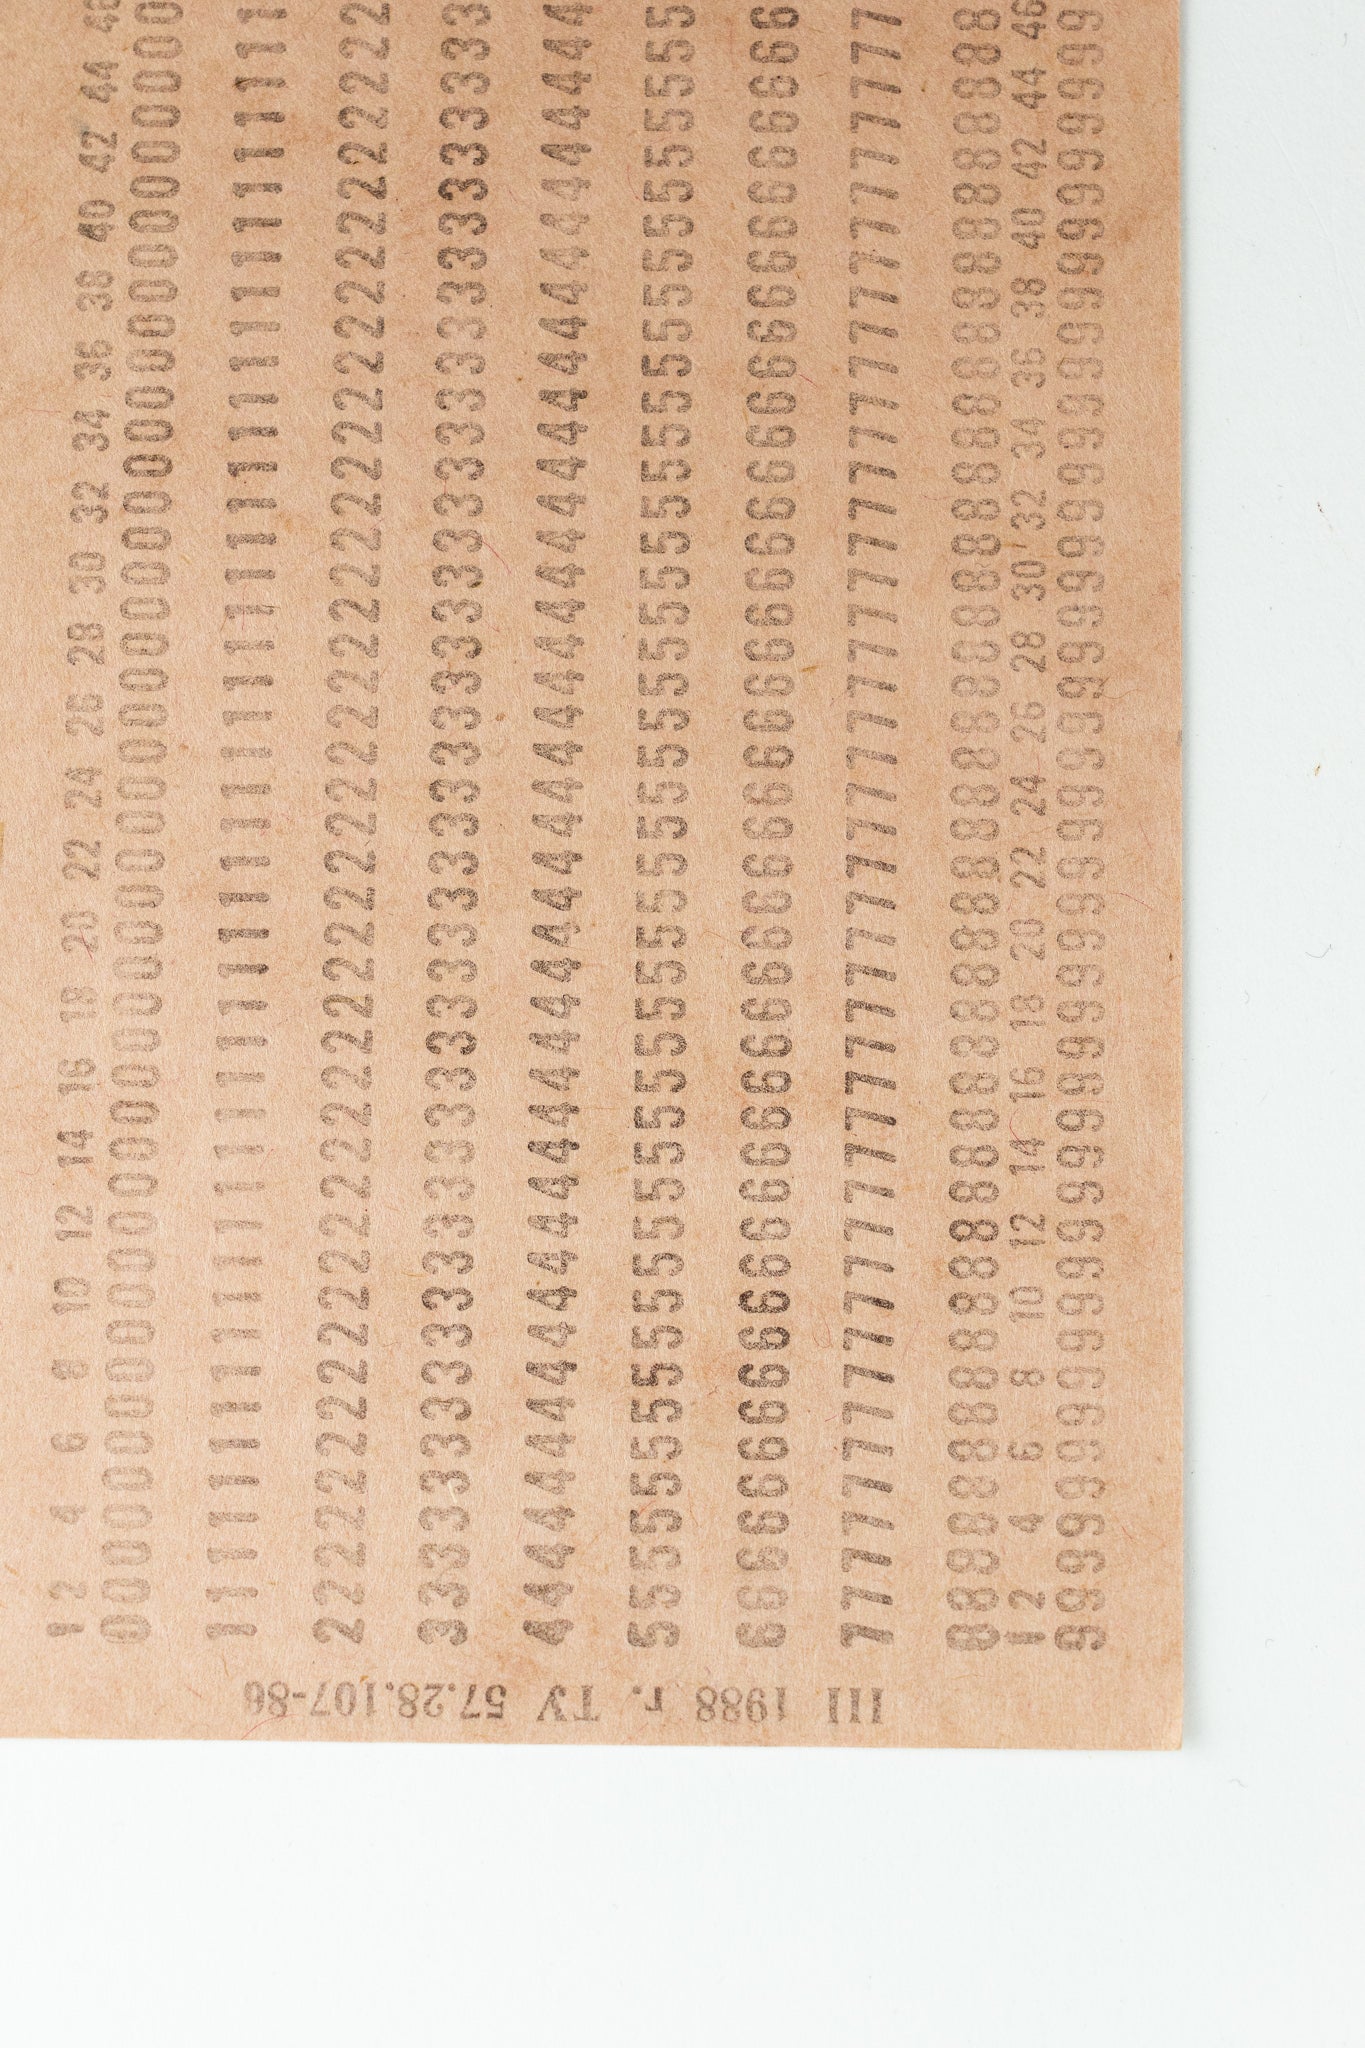 Computer Punch Card